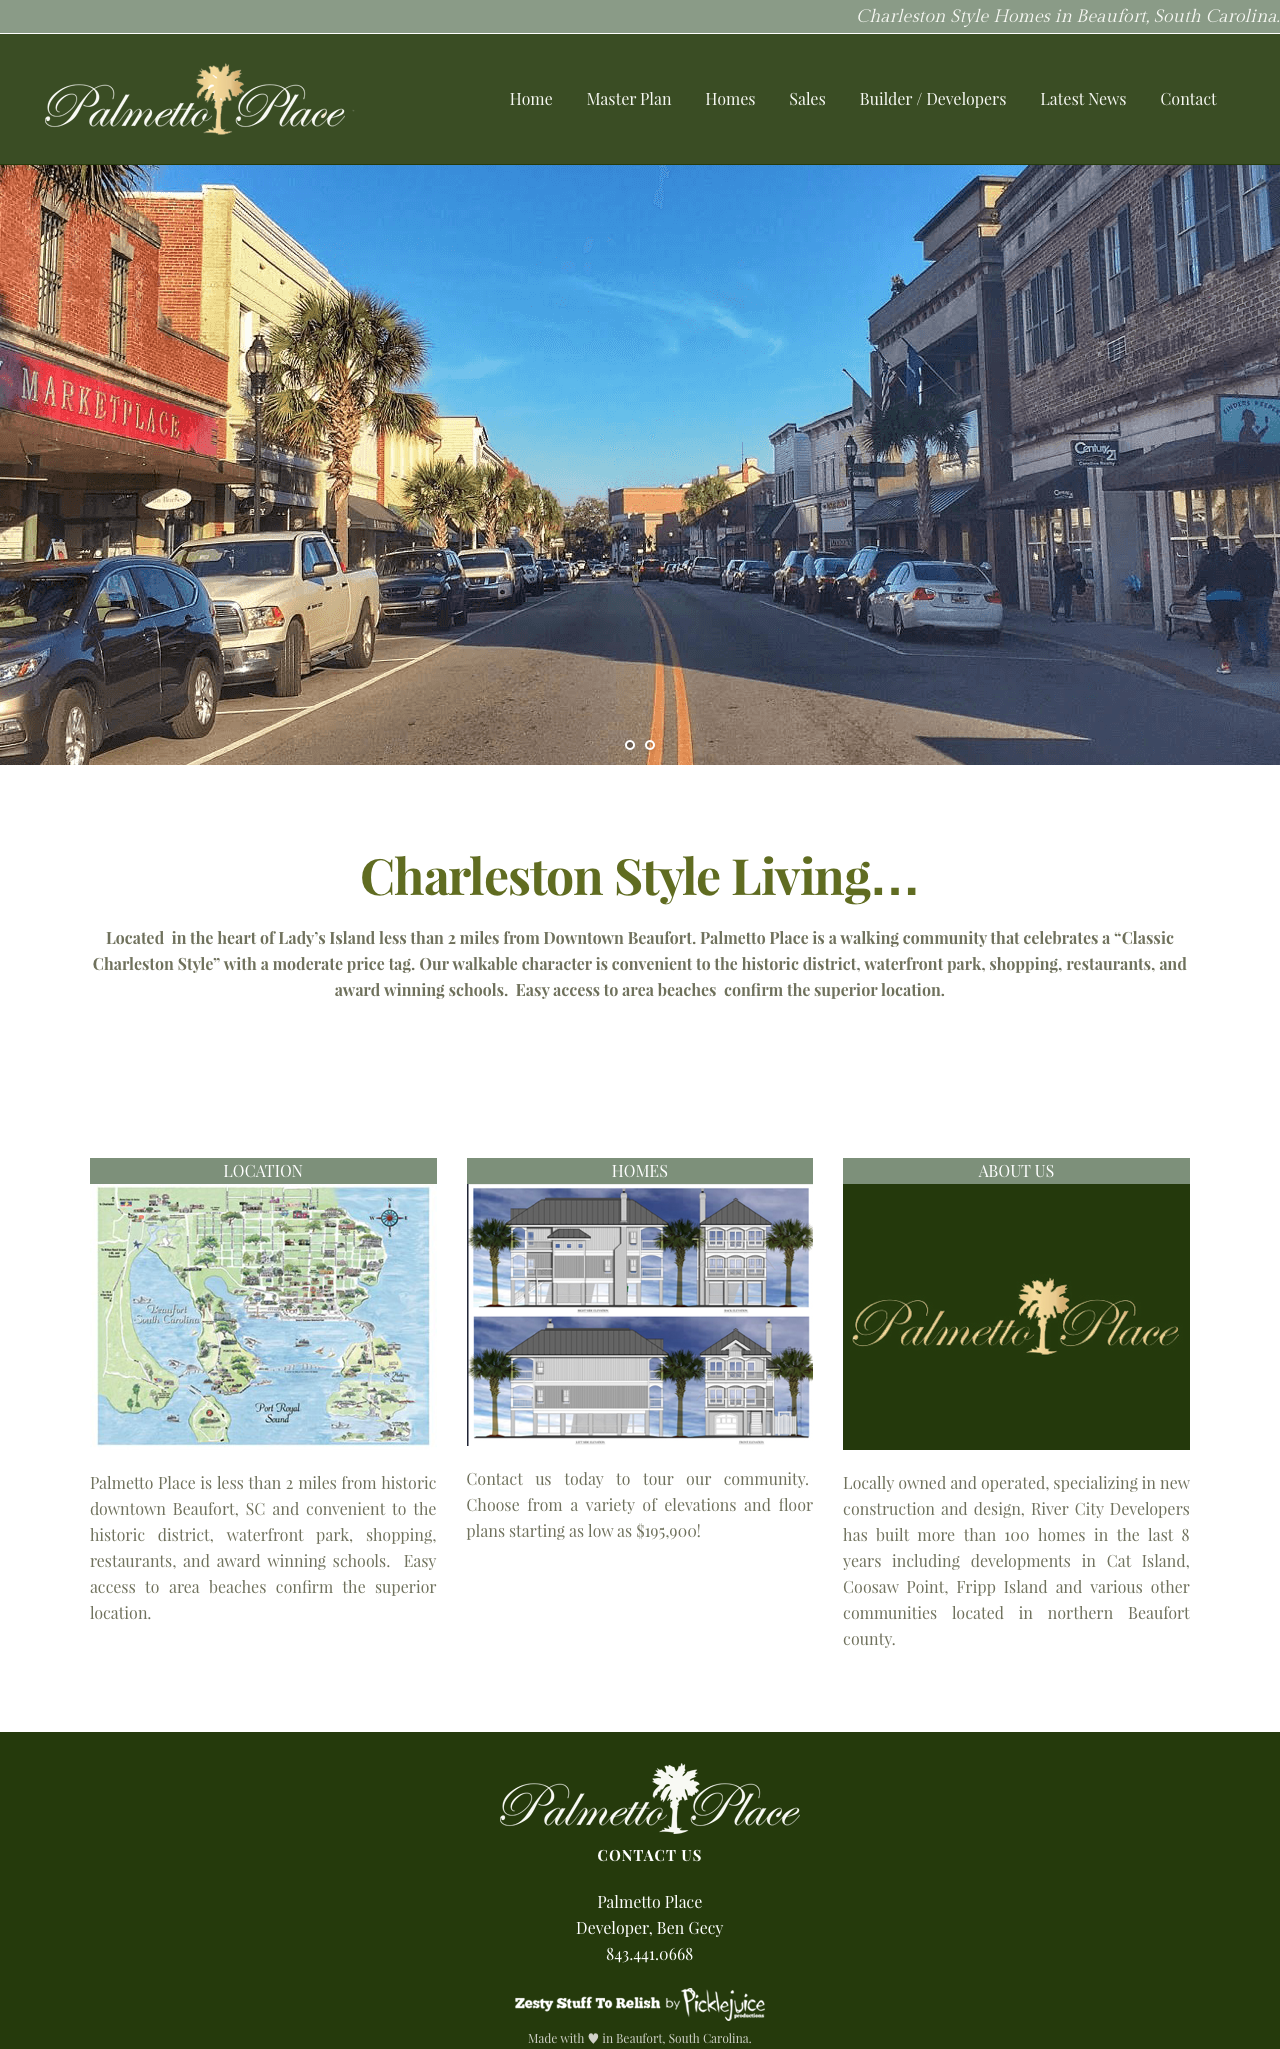 Palmetto Place Beaufort, SC | Residential Real Estate | PickleJuice Productions